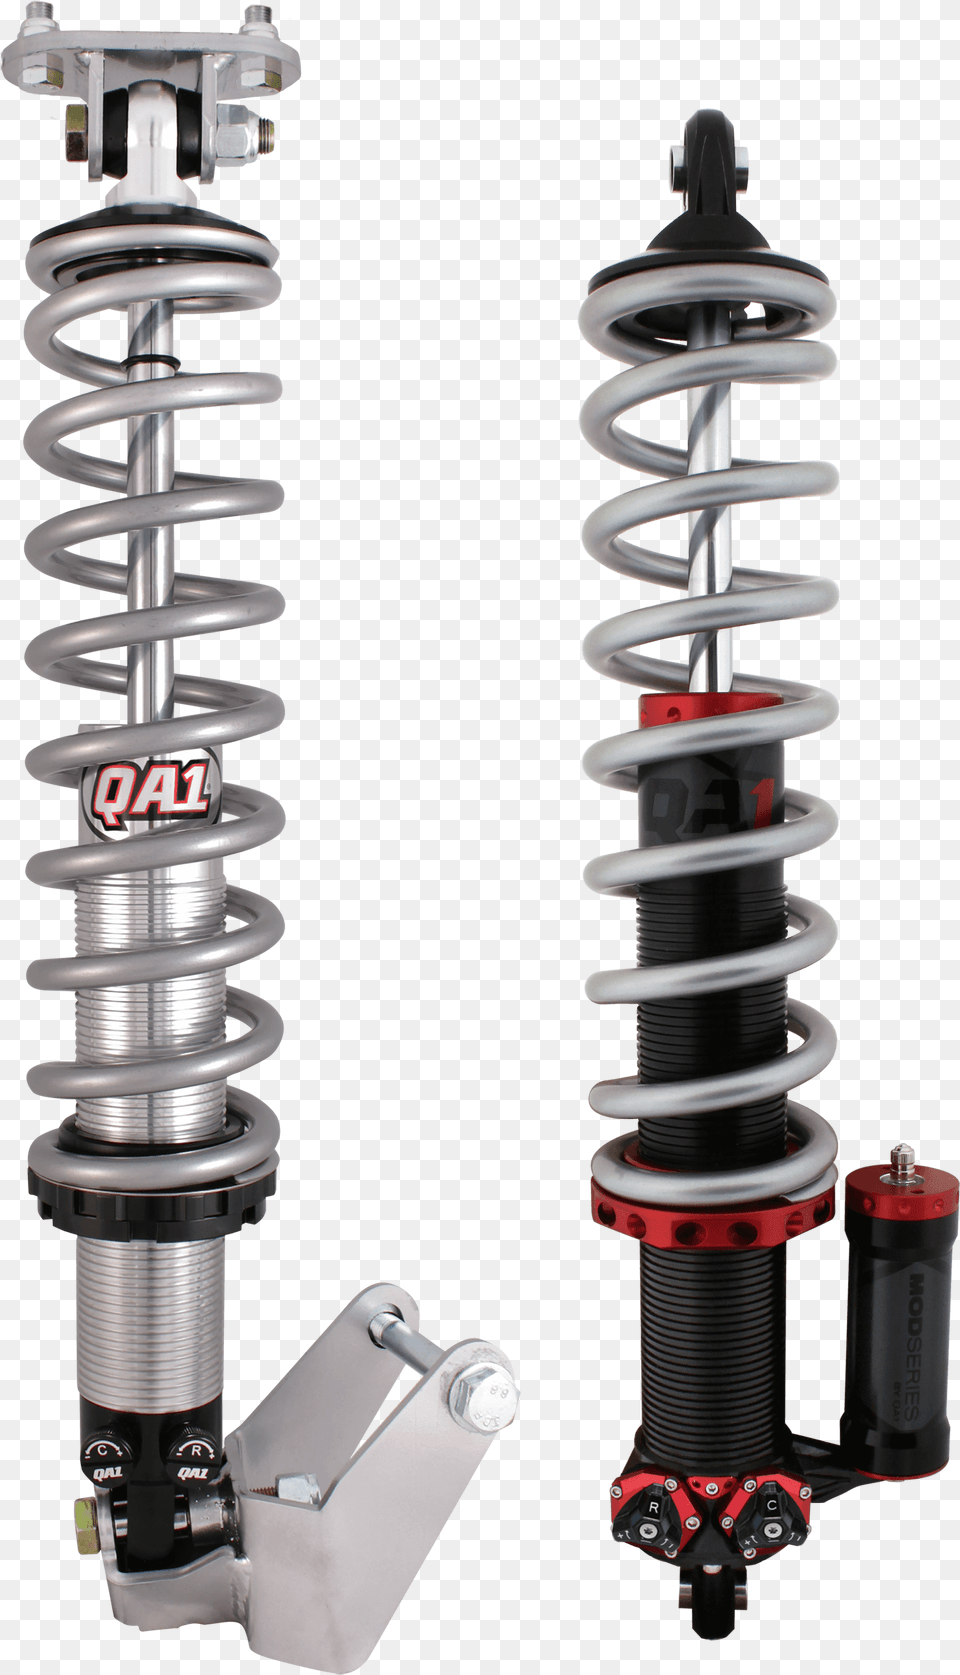 88 Gm G Body Rear Coil Over Conversion Kits Qa1 Rear Coilover G Body, Spiral, Machine, Suspension, Smoke Pipe Png